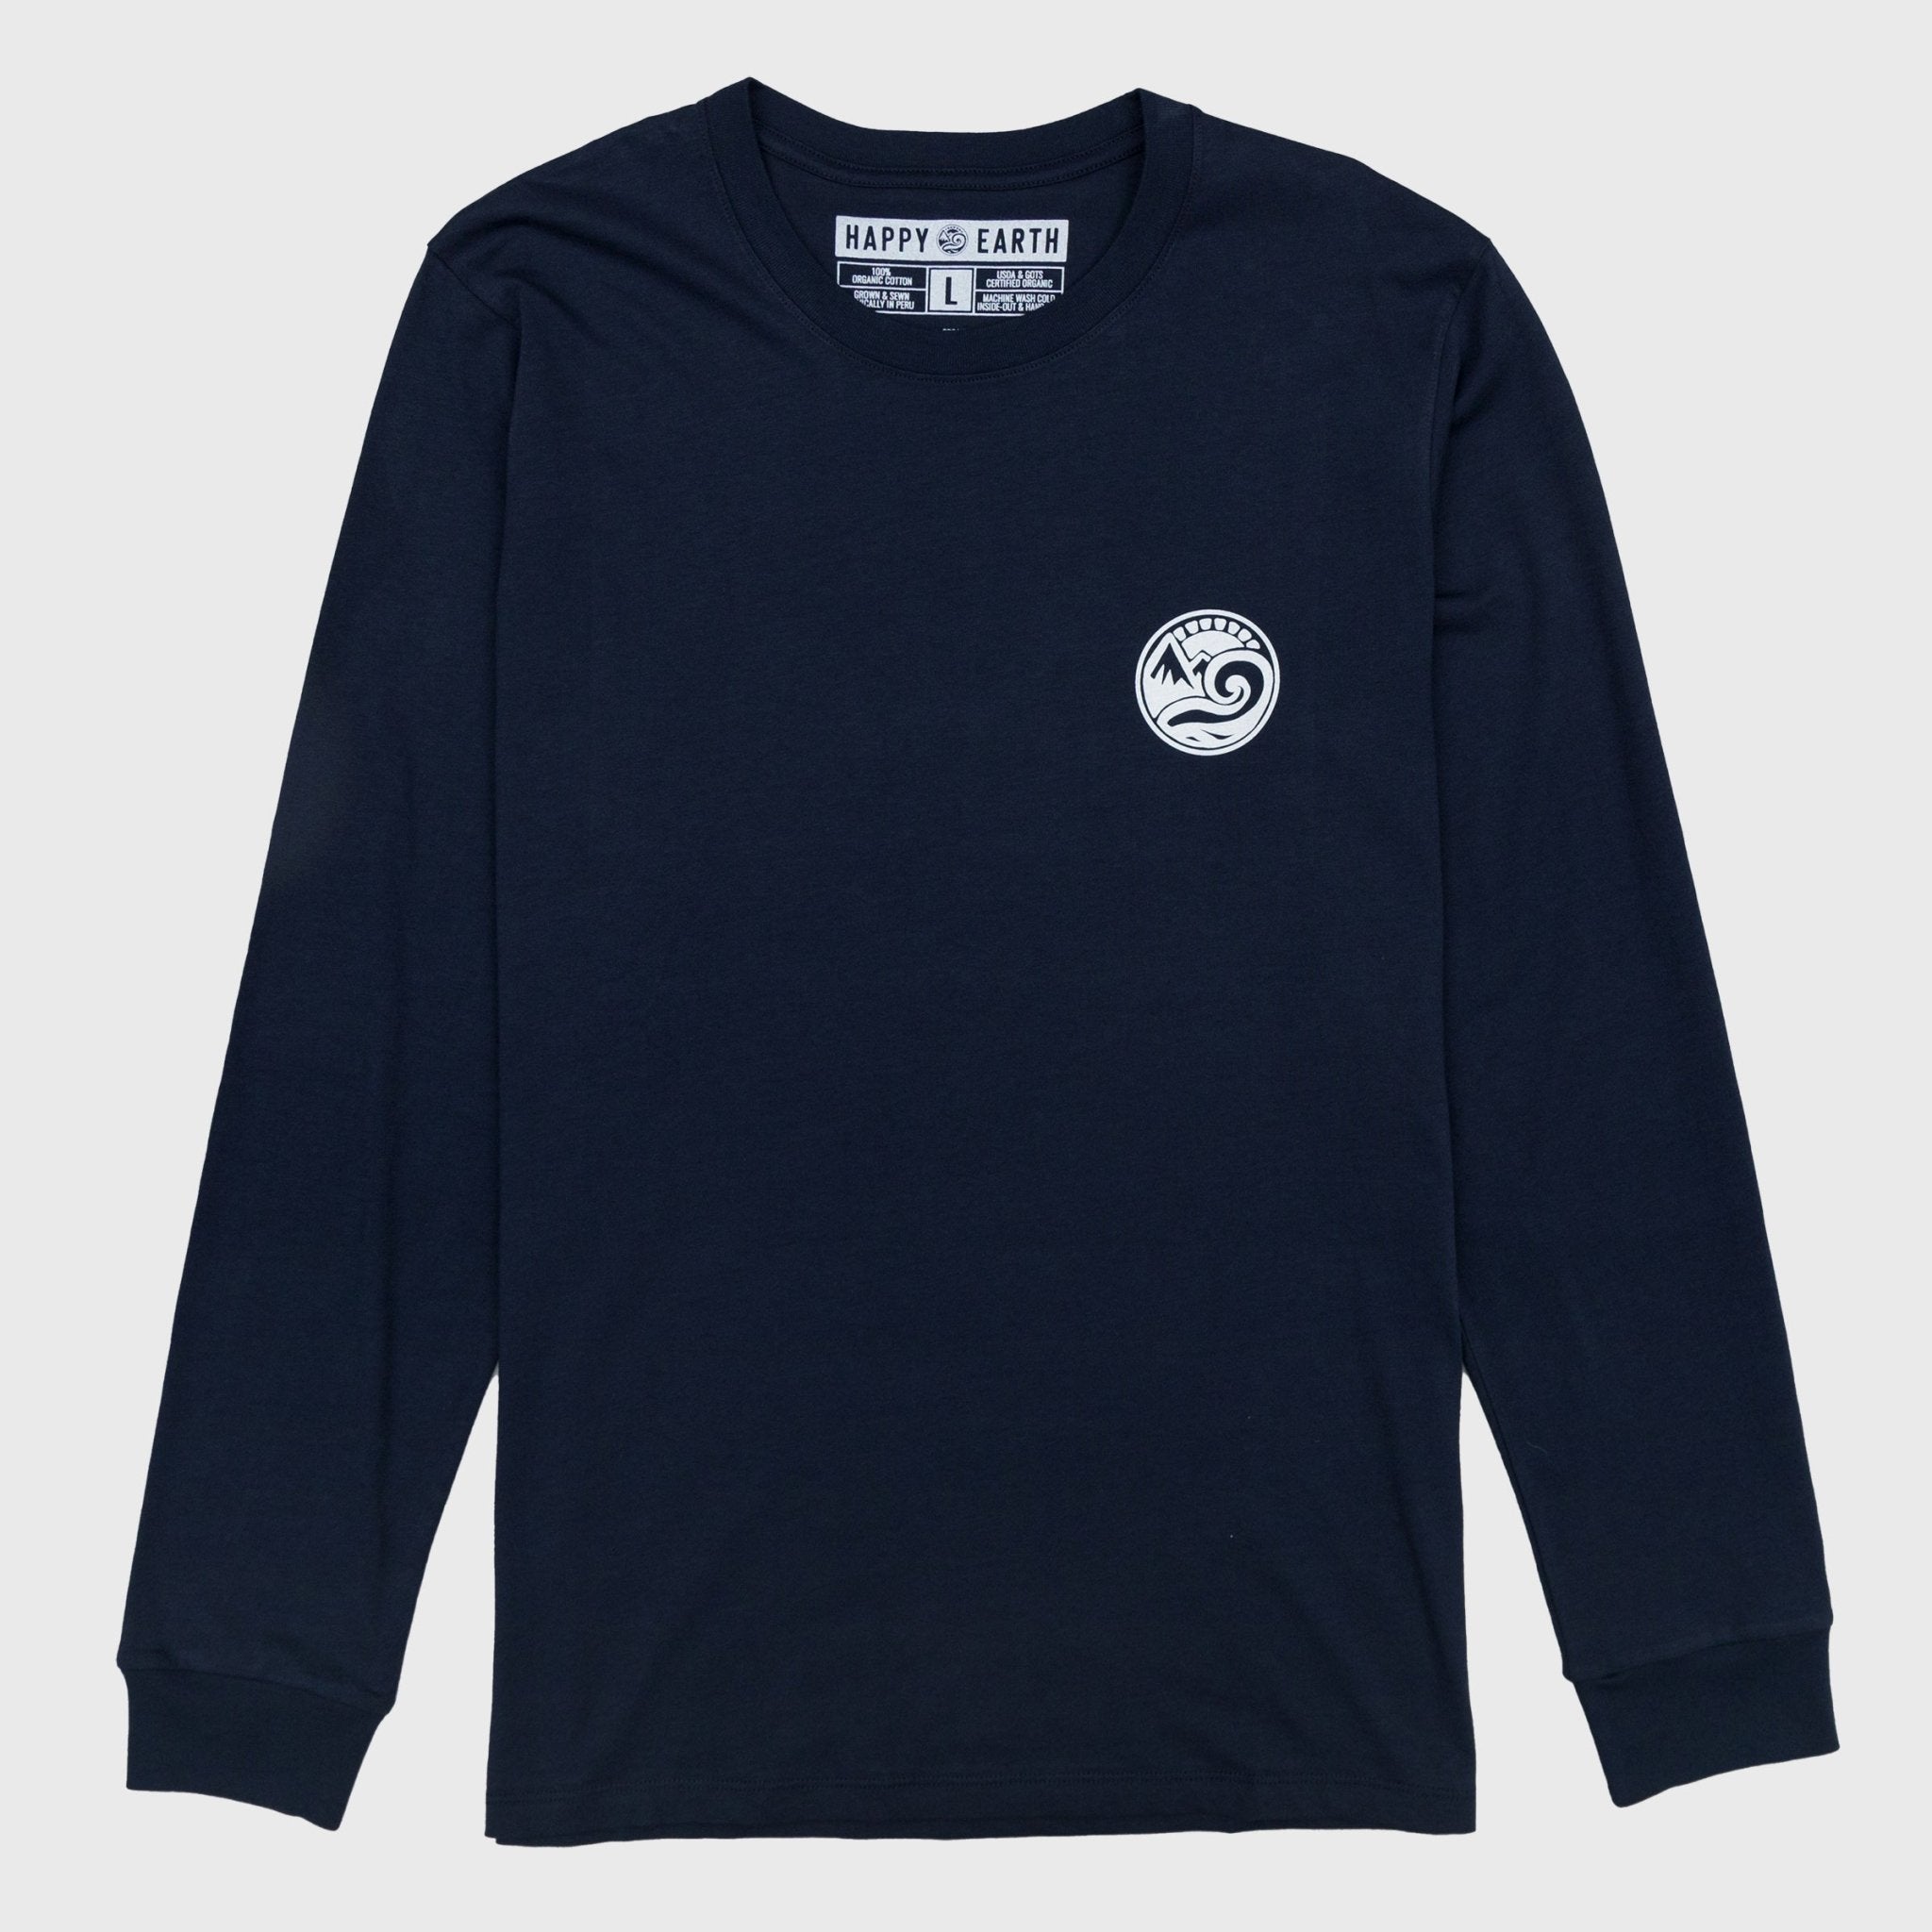 Ours Polaire Organic Long Sleeve Tee - Happy Earth Apparel